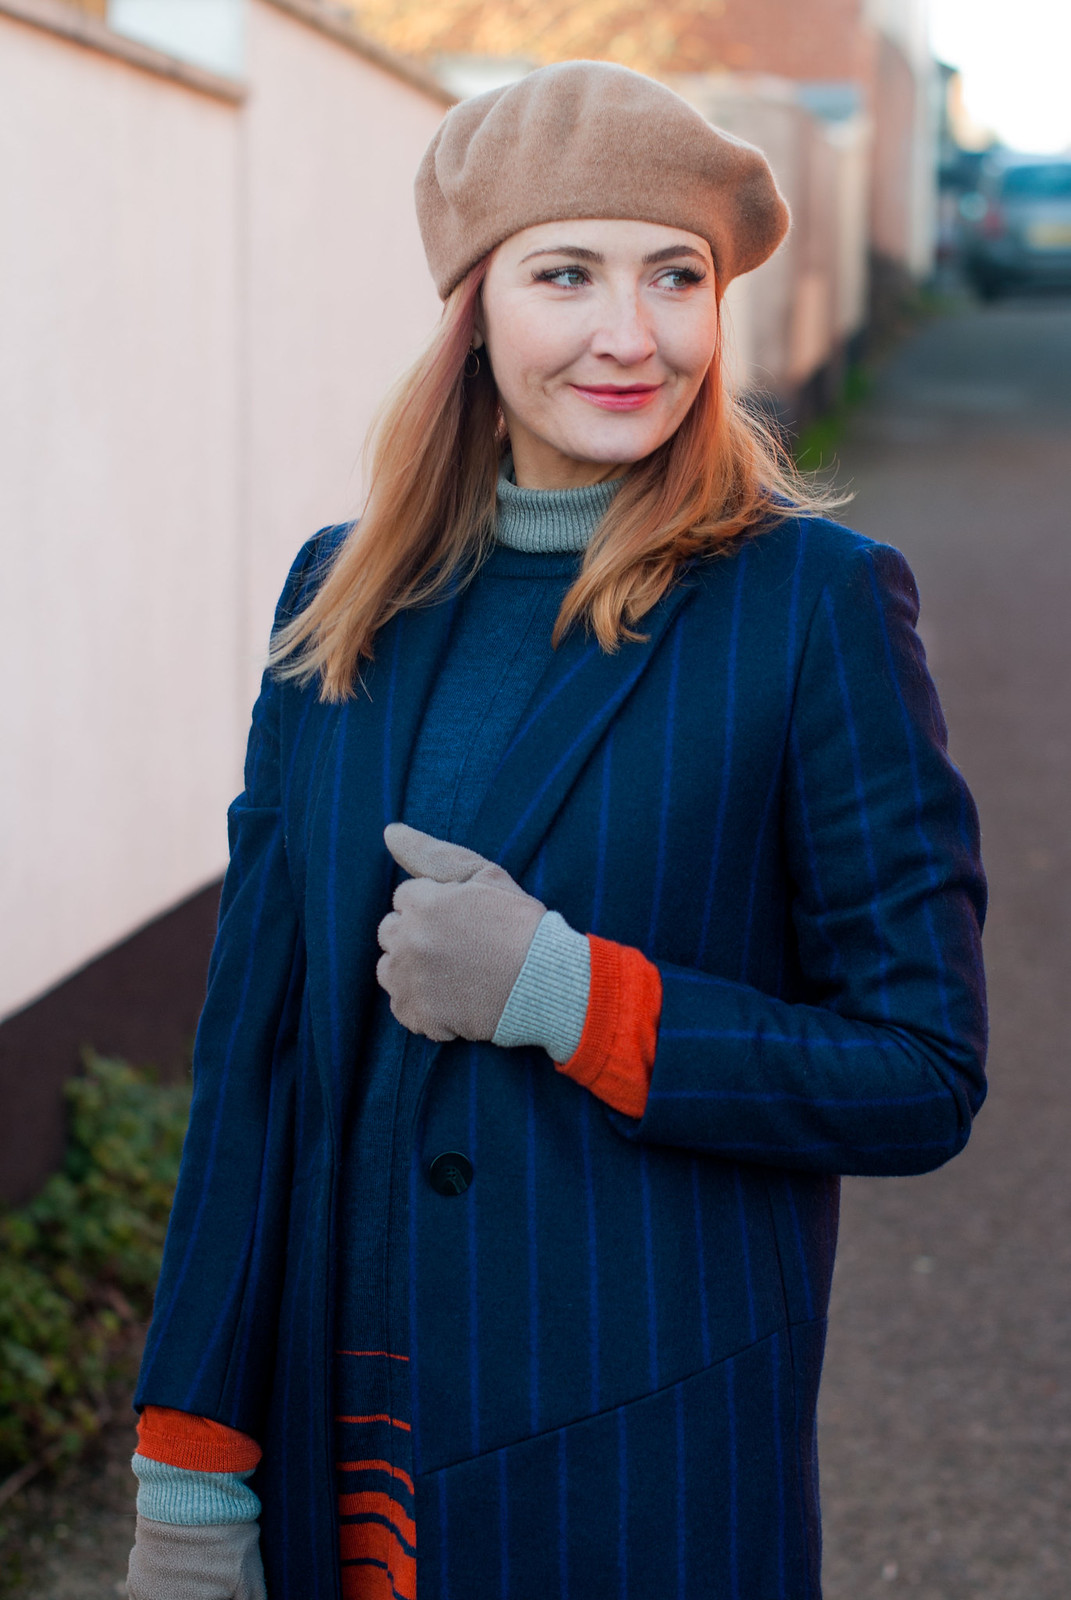 How to style a beret in winter: With a navy pinstripe wool coat, check trousers, a sweater dress and taupe lace ups | Not Dressed As Lamb, over 40 fashion blog